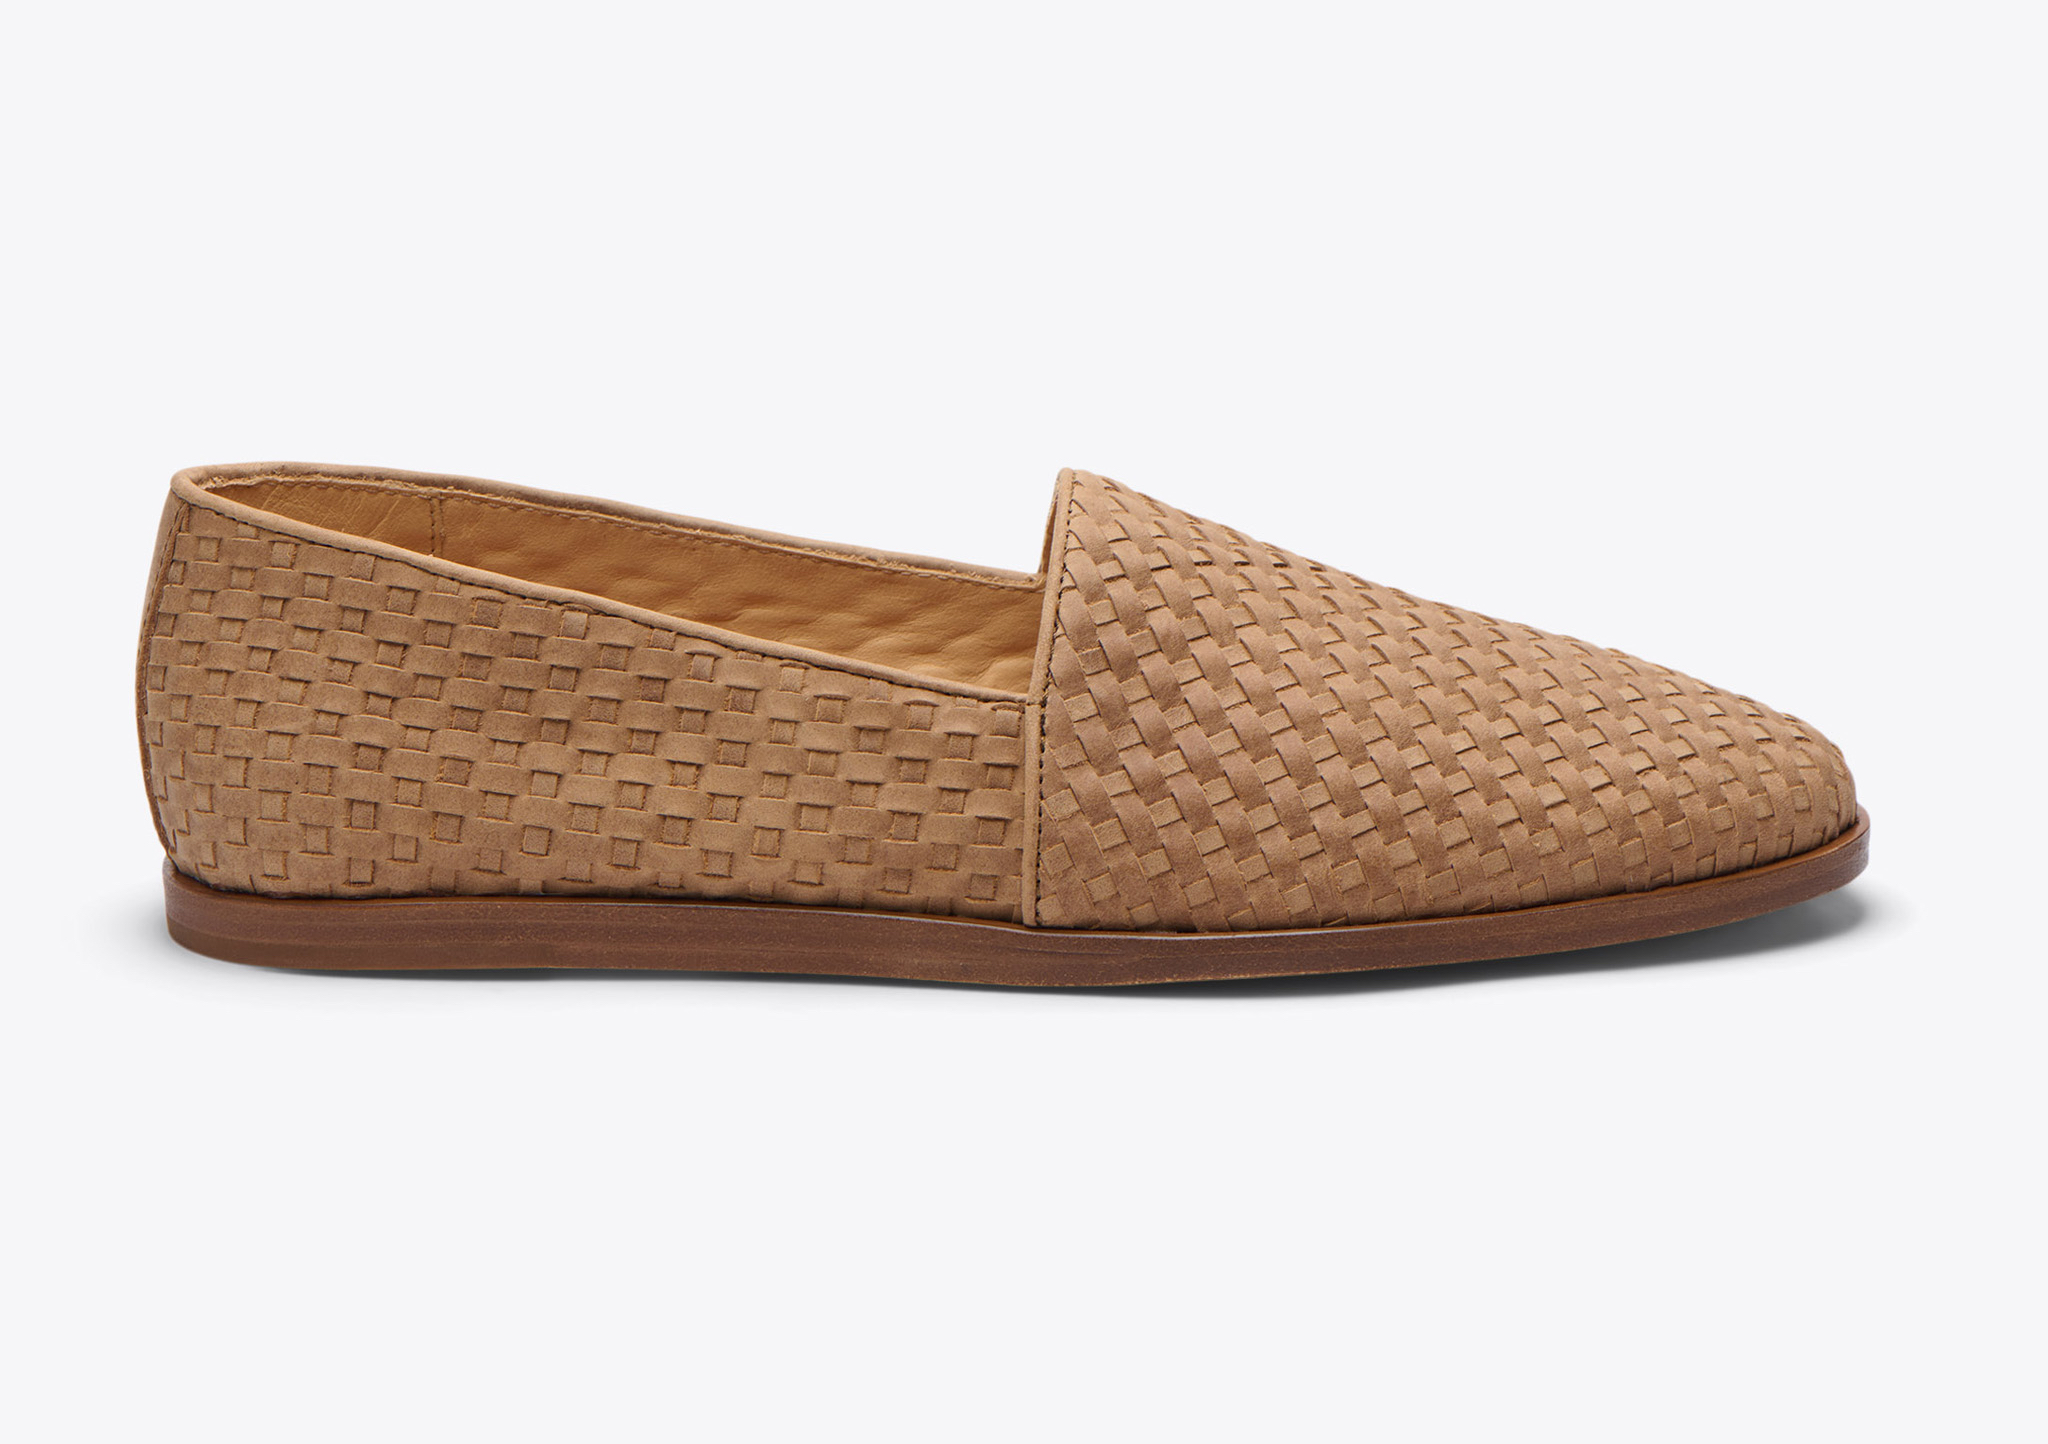 Nisolo Alejandro Woven Slip On Woven Tobacco - Every Nisolo product is built on the foundation of comfort, function, and design. 